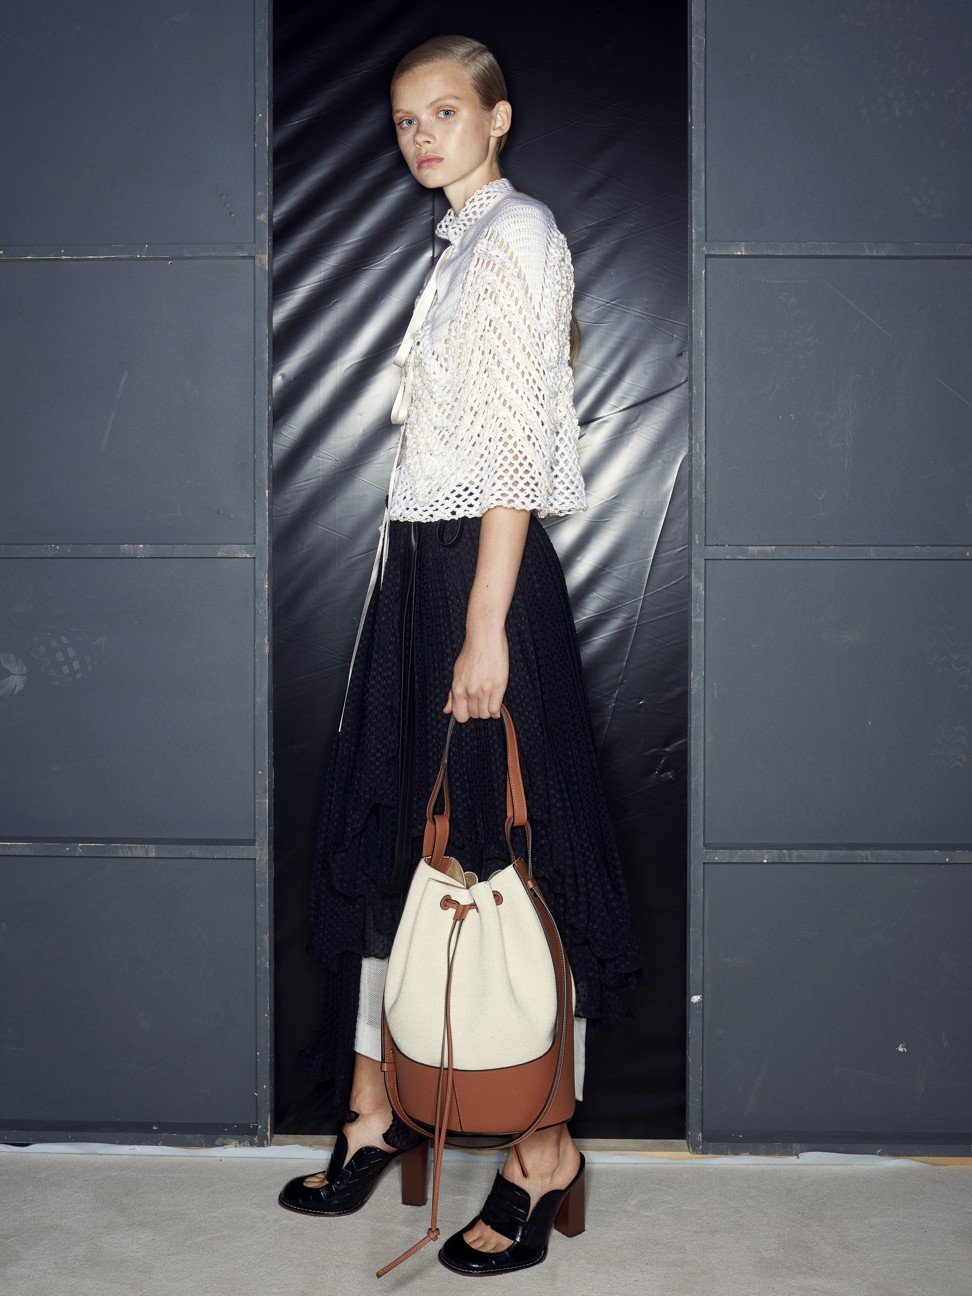 LOEWE - Balloon bag crafted in canvas and leather. loewe.cm